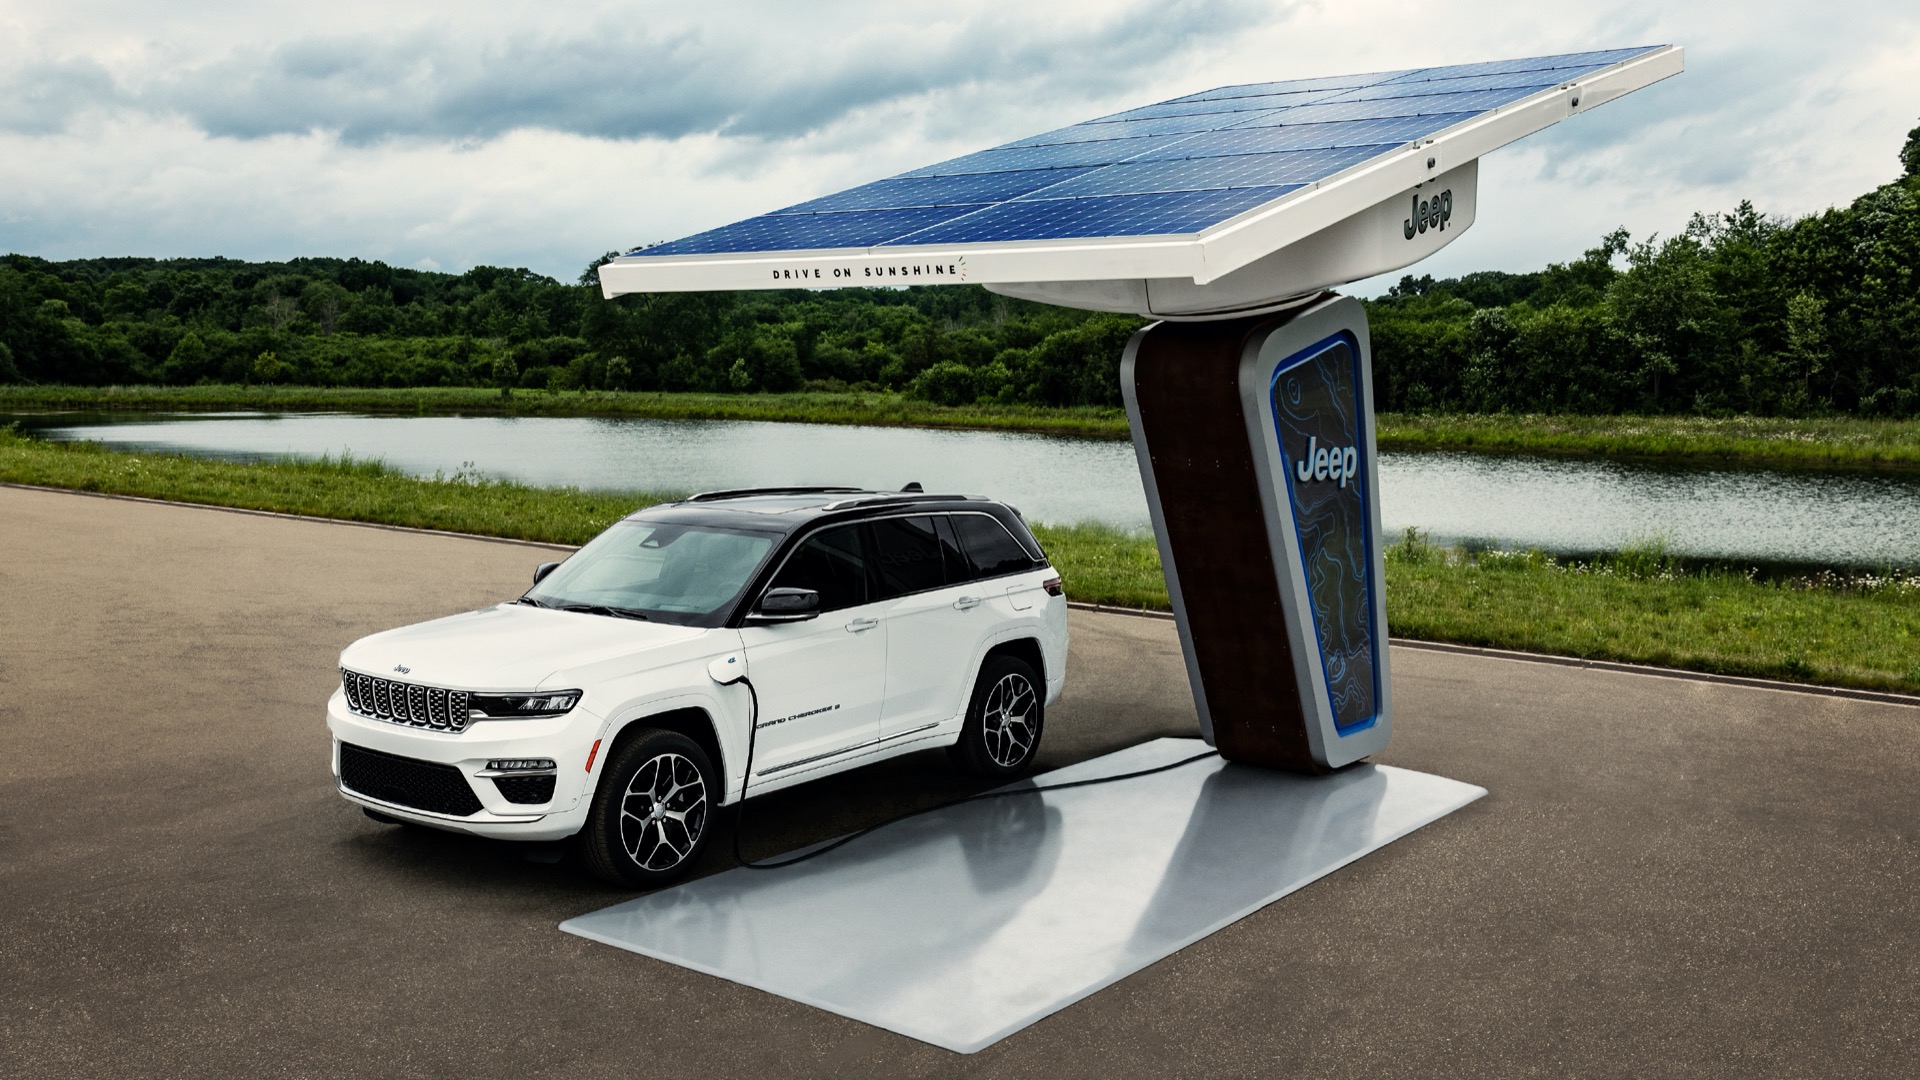 2022 Jeep Grand Cherokee 4xe plug-in hybrid goes 26 miles on a charge, gets 23 mpg on gasoline2022 Jeep Grand Cherokee 4xe plug-in hybrid goes 26 miles on a charge, gets 23 mpg on gasoline